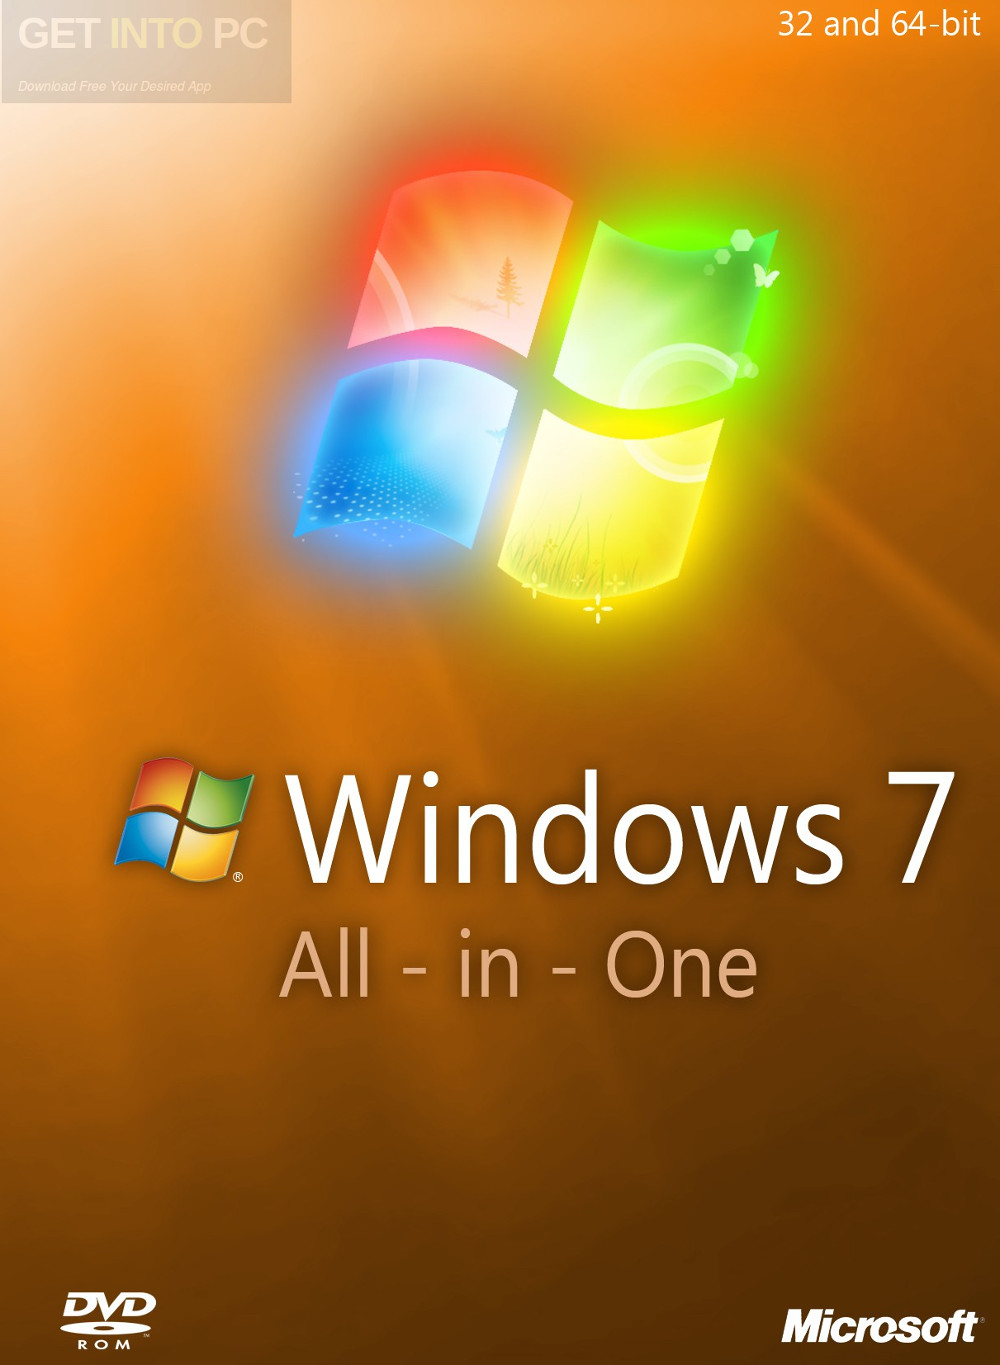 Windows 7 AIl in One May 2017 Free Download